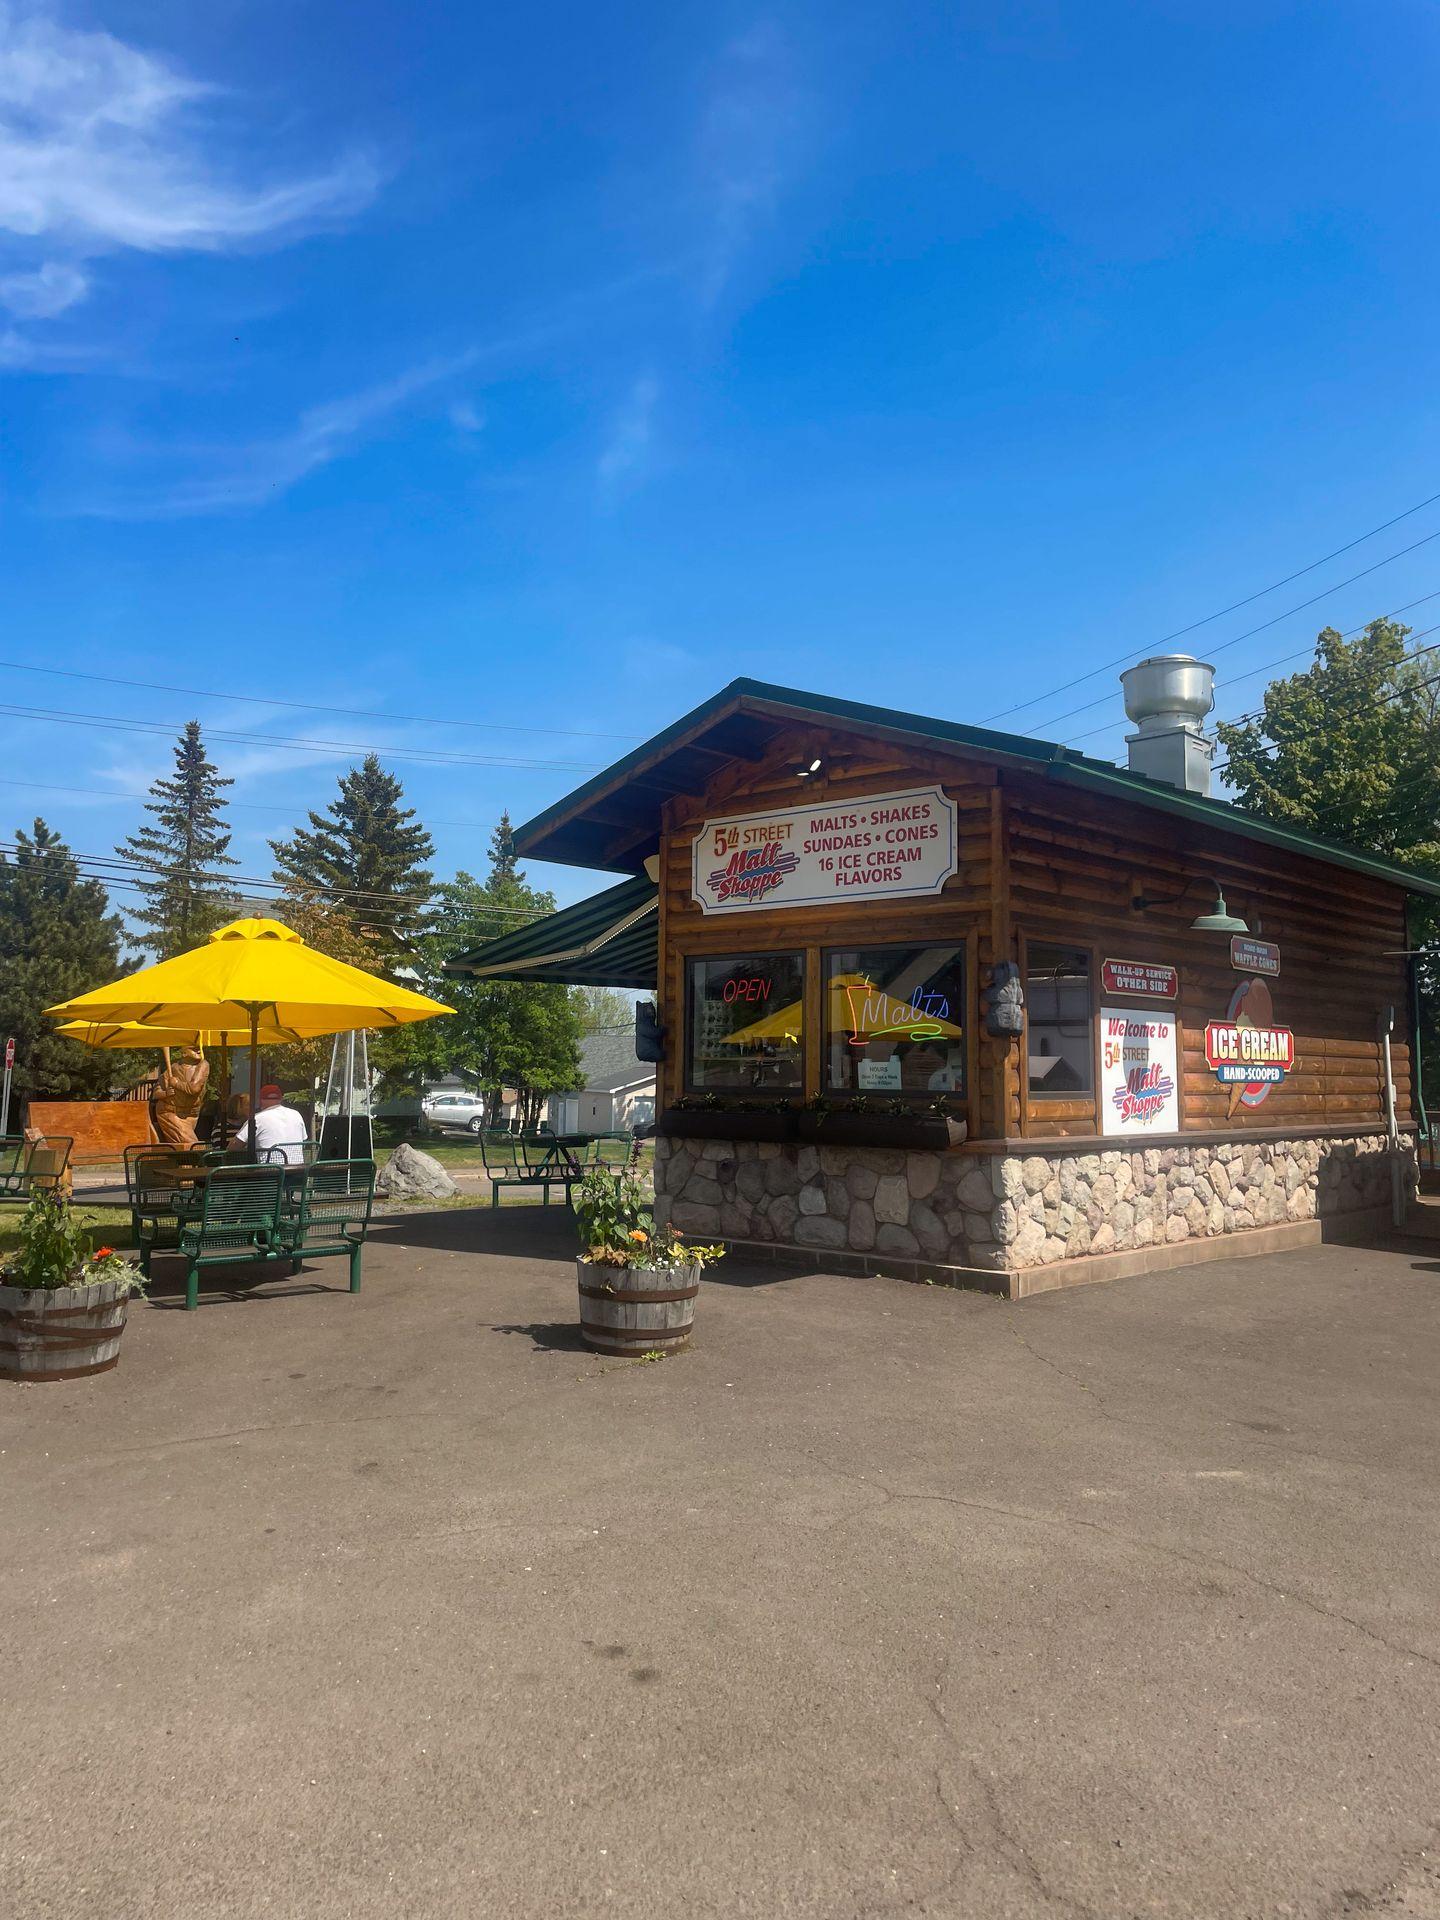 The exterior of 5th Street Malt Shoppe, a small roadside building that looks like it's made of logs. There is a table with a yellow umbrella in front of the building.